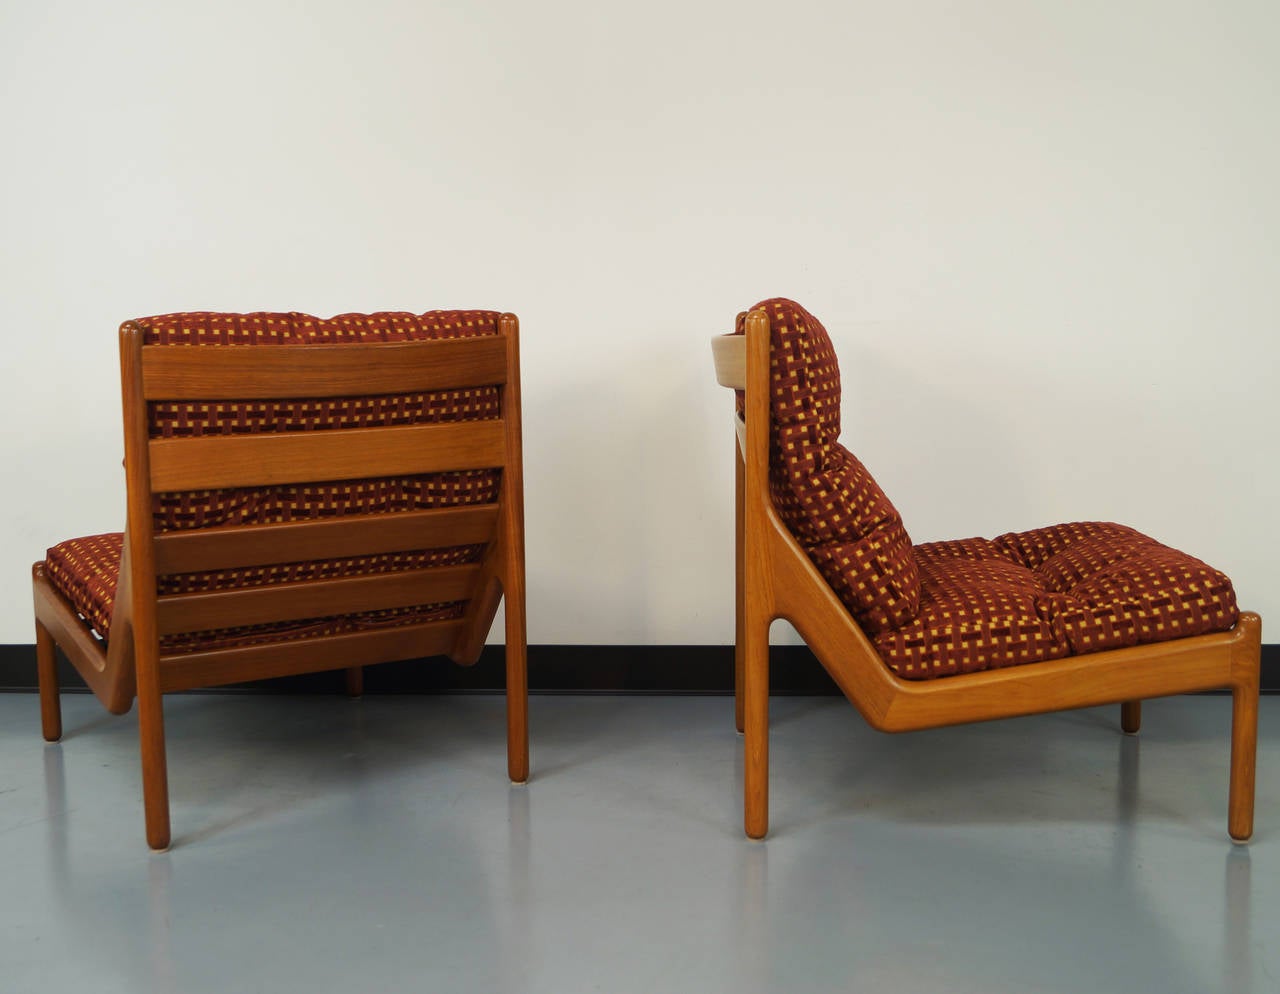 Pair of solid teak lounge chairs designed by Niels Bach.